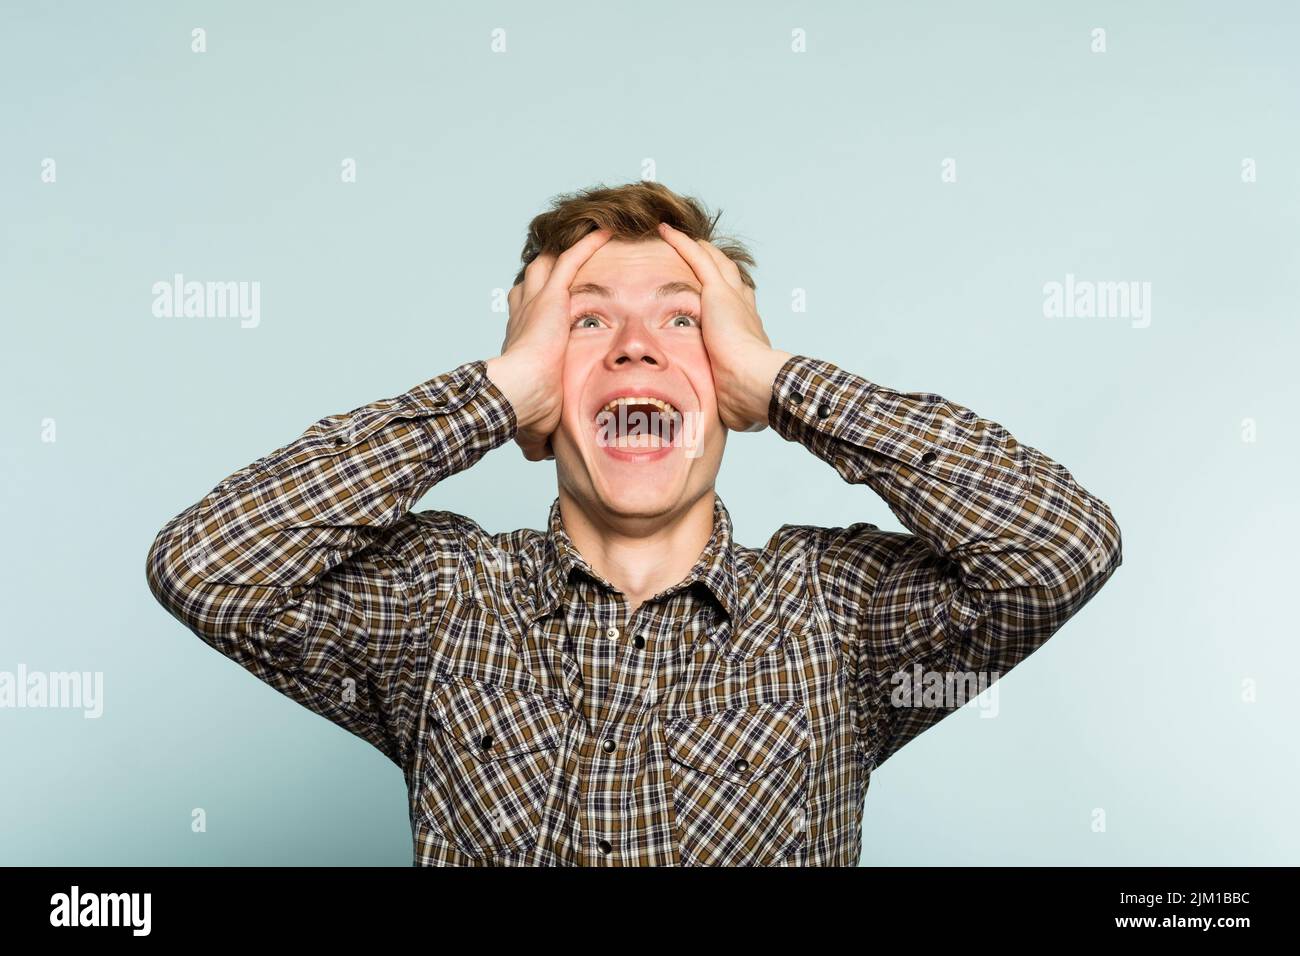 overjoyed happy excited man clutching head emotion Stock Photo